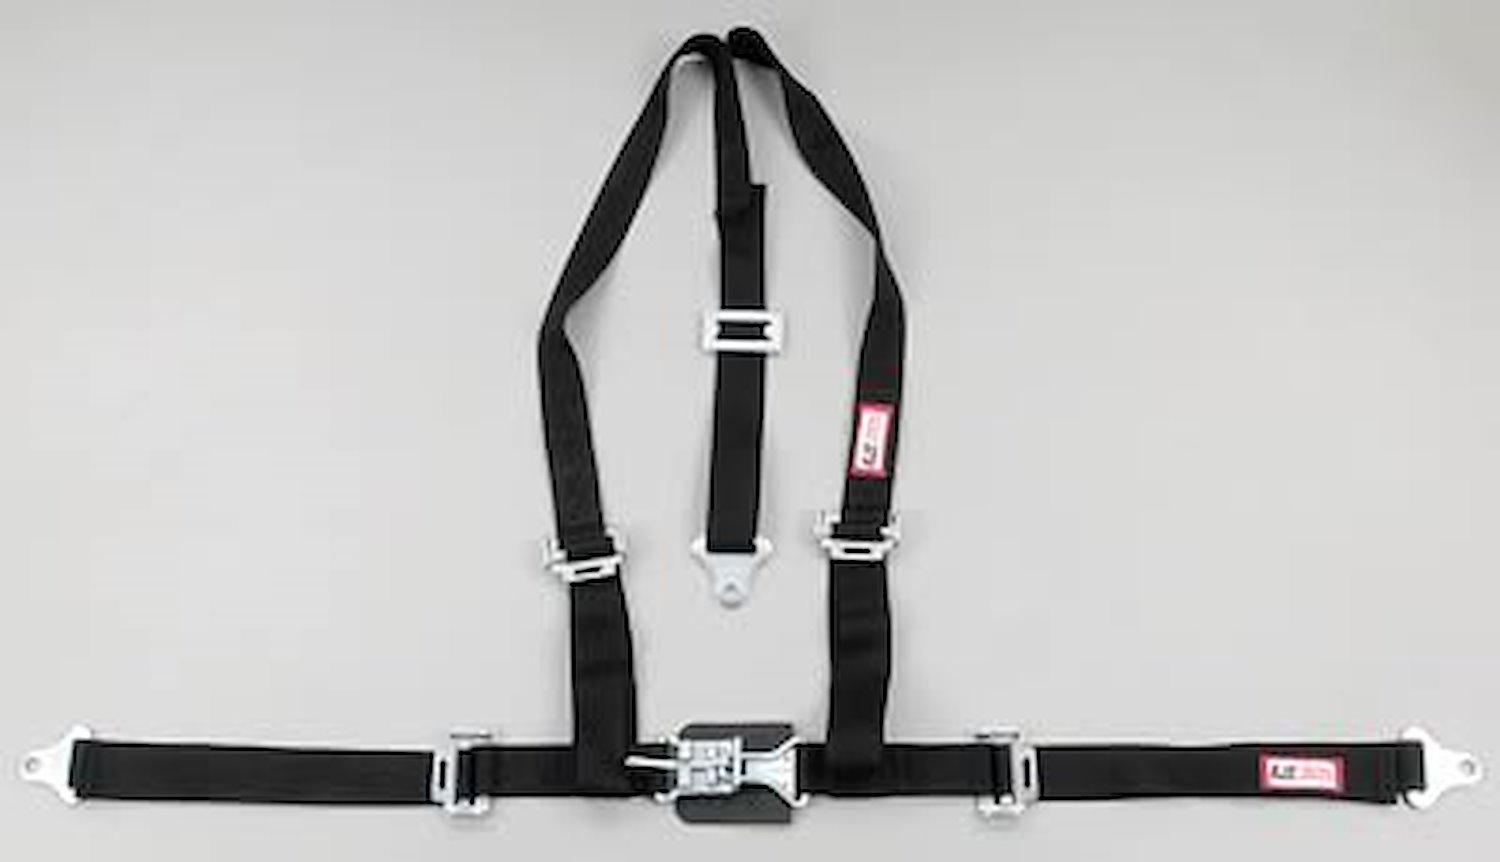 NON-SFI L&L HARNESS 2 PULL DOWN Lap Belt BOLT SEWN IN 2 S.H. INDIVIDUAL FLOOR Mount w/STERNUM STRAP WRAP/BOLT RED